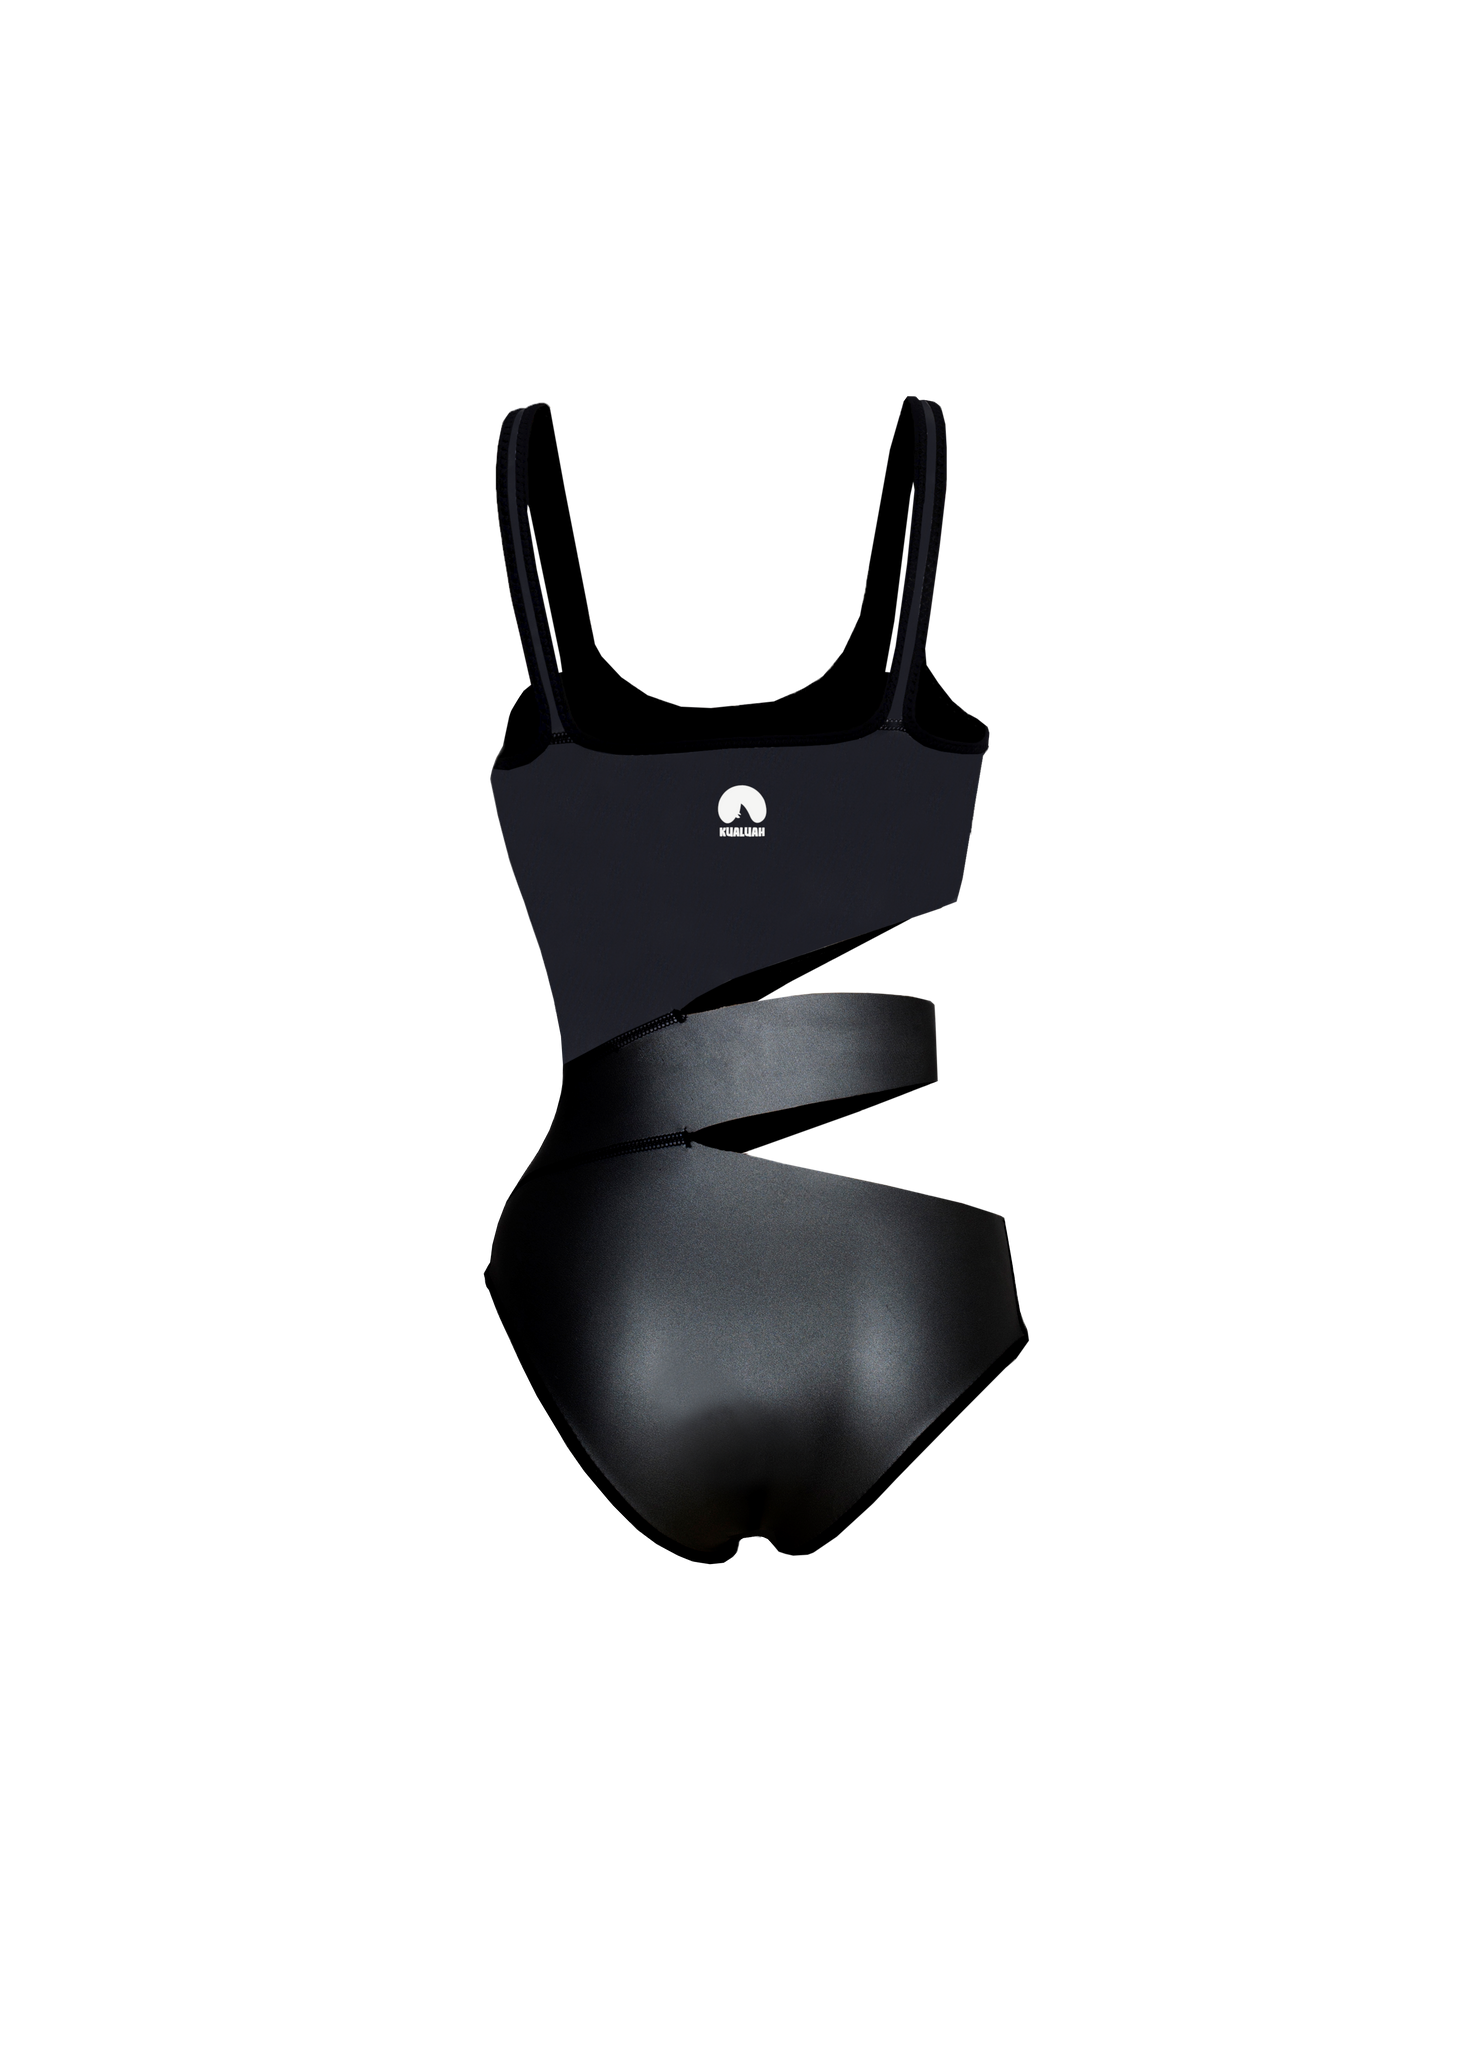 Kualuah Fuvamulah neoprene swimsuit. Keeping you warm while surfing, diving, kiteboarding and wakeboarding . Wear it with our leggings and jacket to explore our oceans. Made out of limestone neoprene.